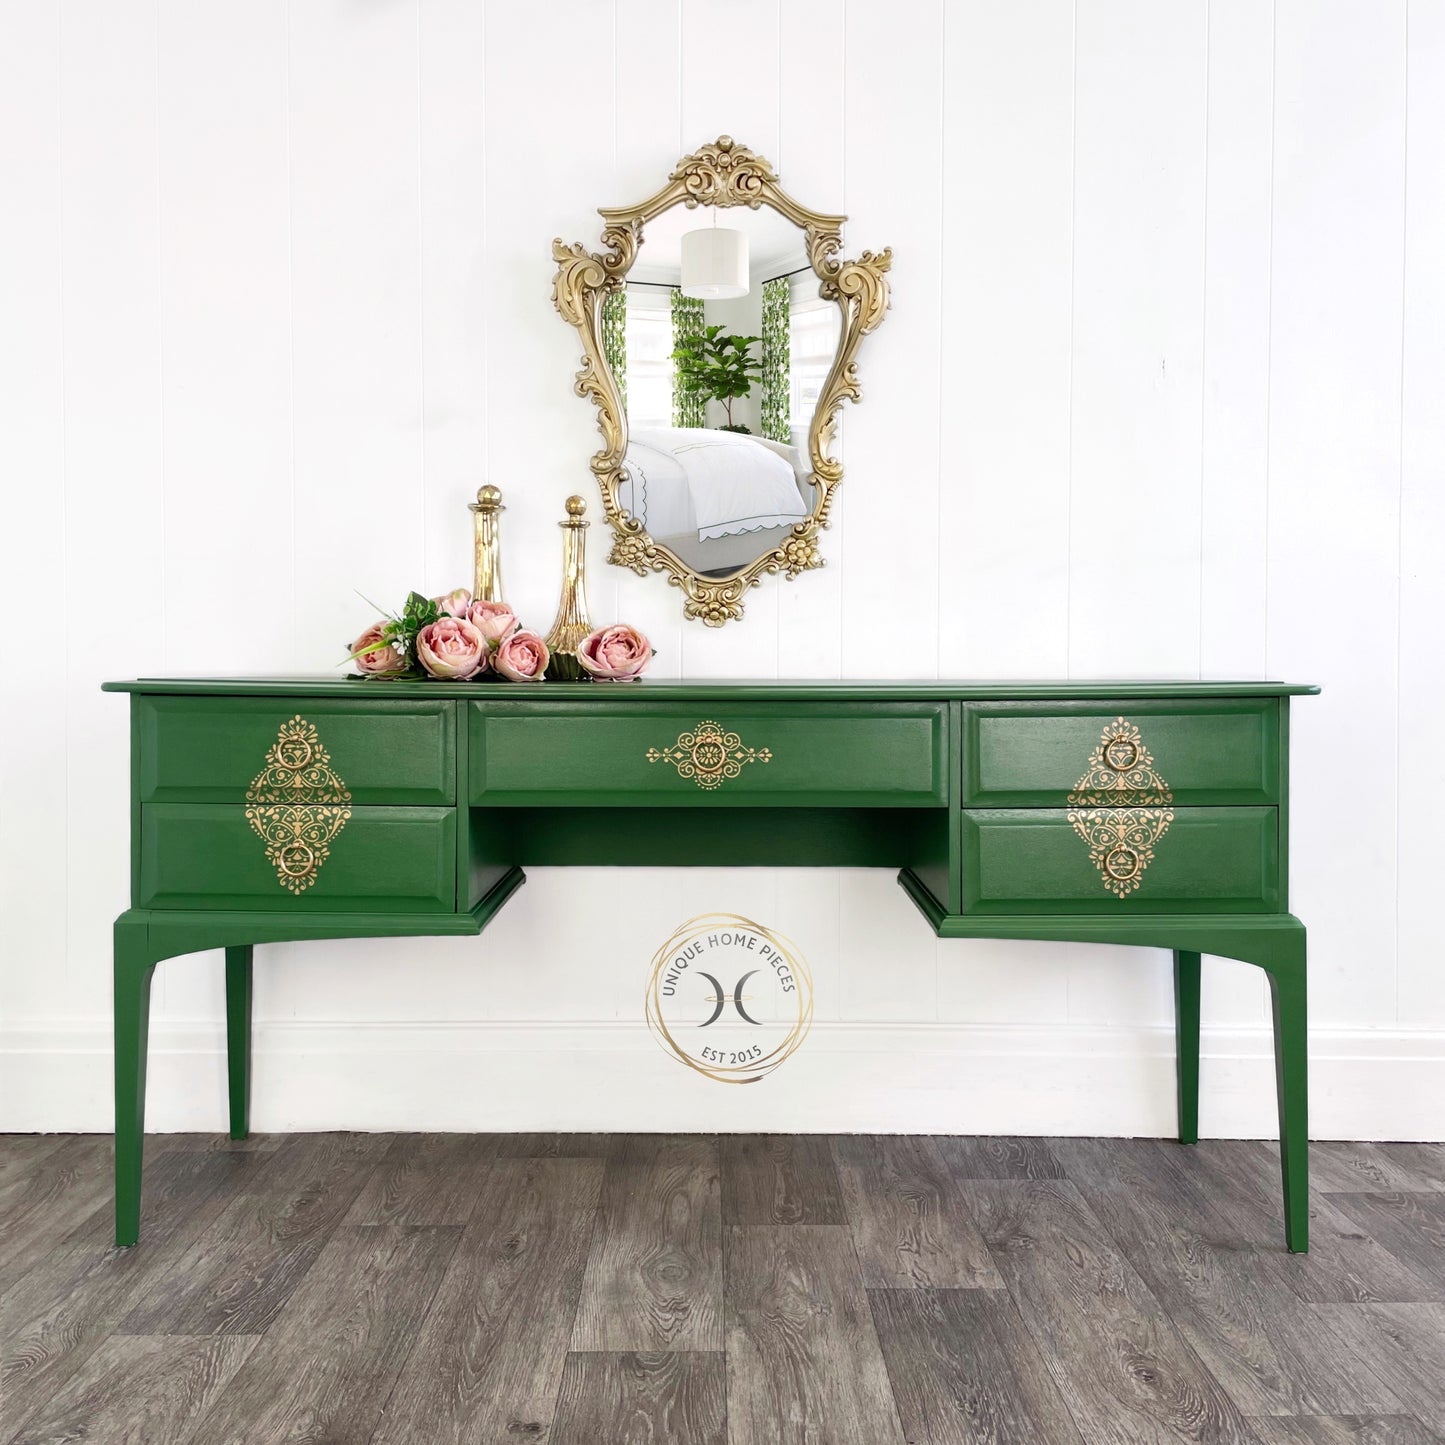 stag minstrel dressing table in park bench green by fushion. gold detailing to the front of drawers, sides and drawer interiors.